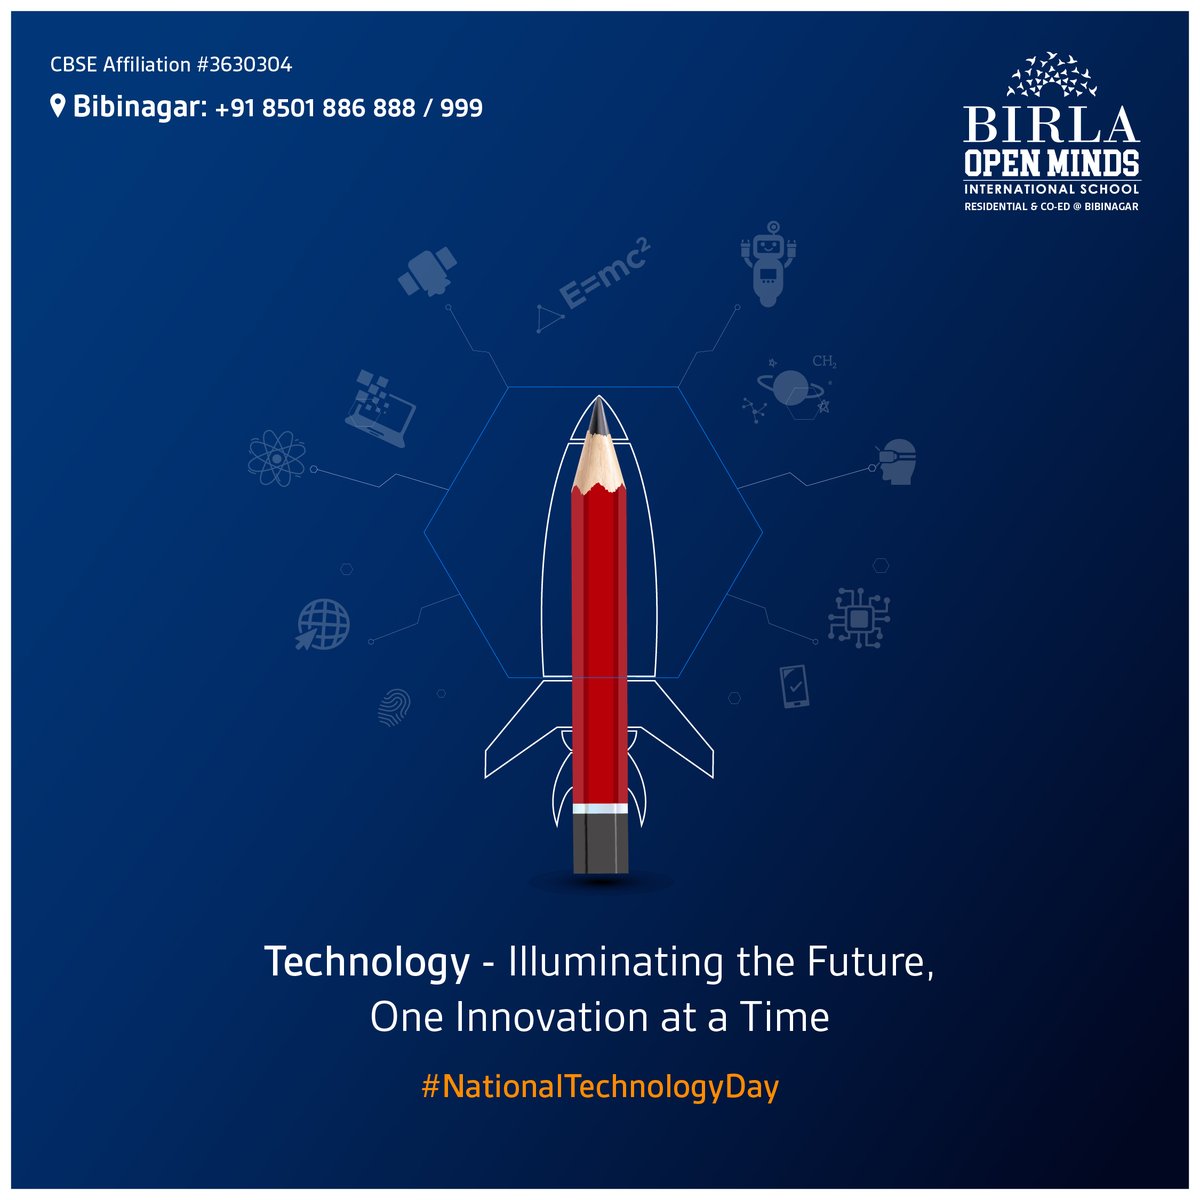 What’s that one tech object you ALWAYS dreamed about possessing?

Tell us in the comments below.

#NationalTechnologyDay #BirlaOpenMinds #BirlaOpenMindsBibinagar #ResidentialSchool #AdmissionsOpen #InternationalSchool #CBSEschool #Bibinagar #Hyderabad